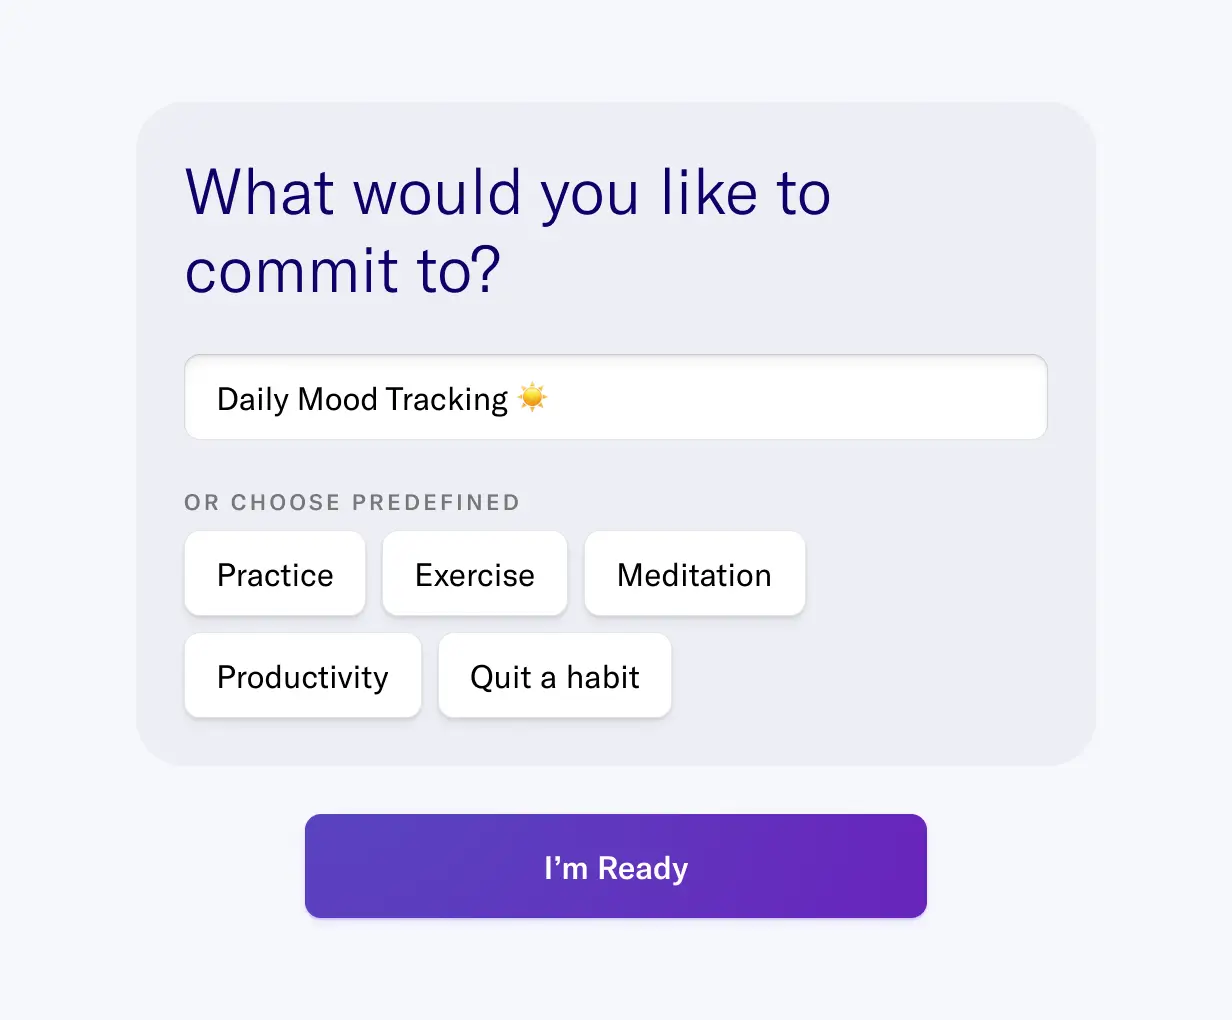 Enter Daily Mood Tracking as your commitment title